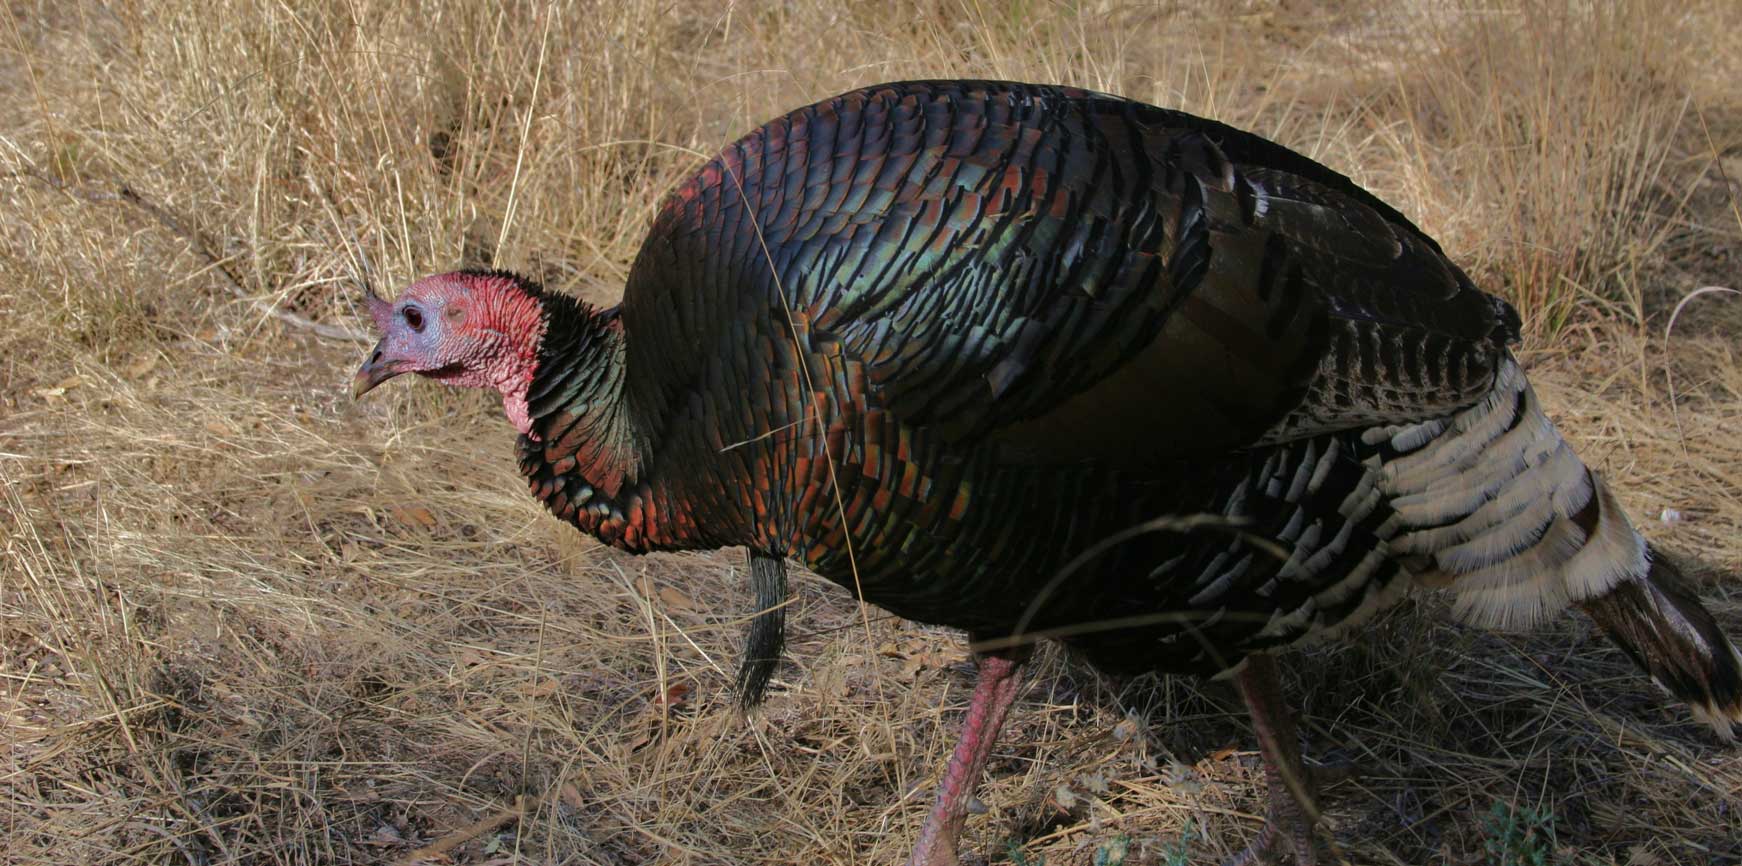 the-ocellated-turkey-puts-the-trip-in-tryptophan-outdoors-pet